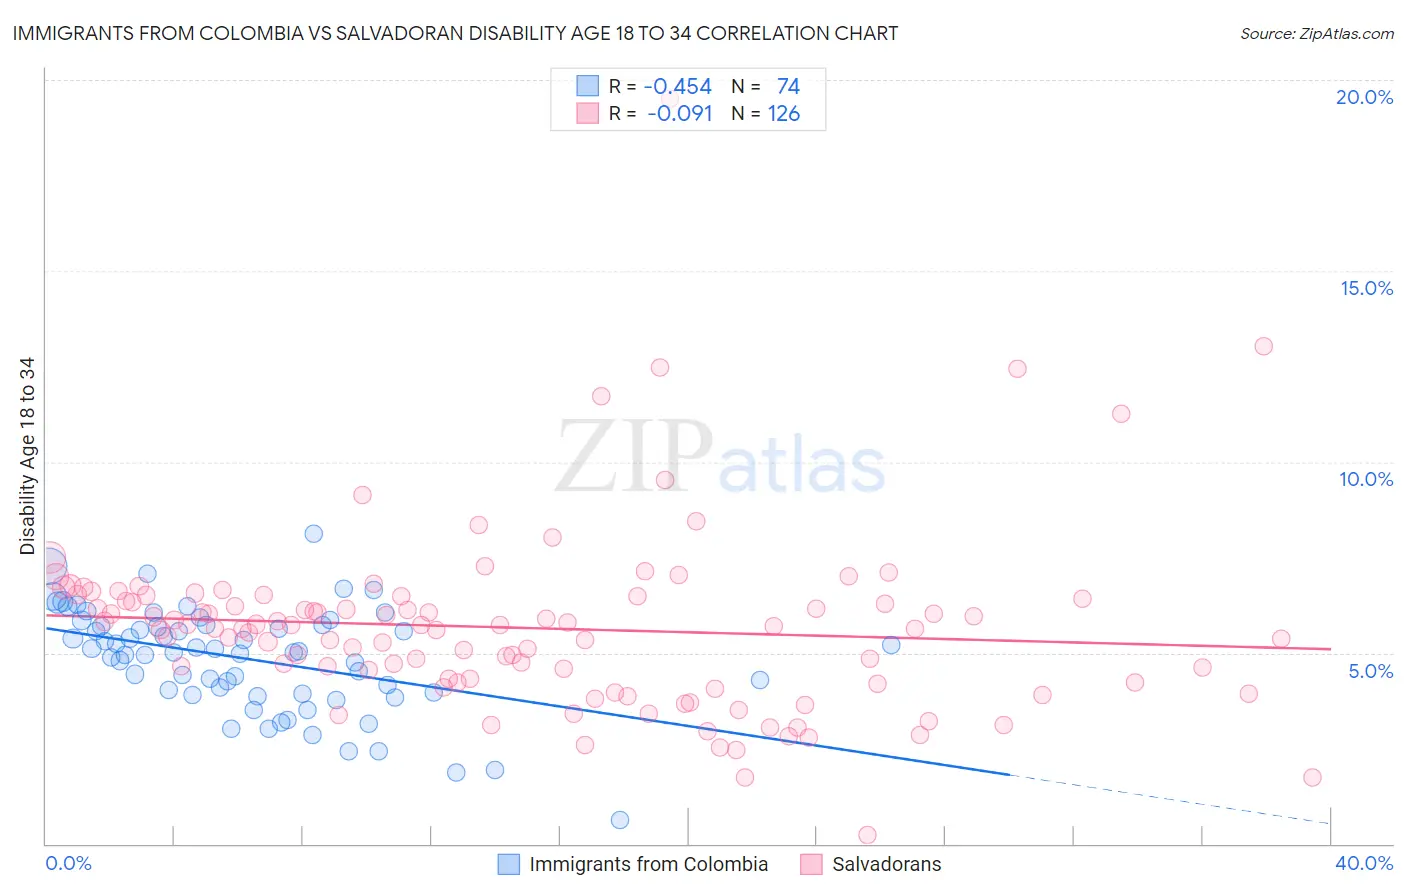 Immigrants from Colombia vs Salvadoran Disability Age 18 to 34